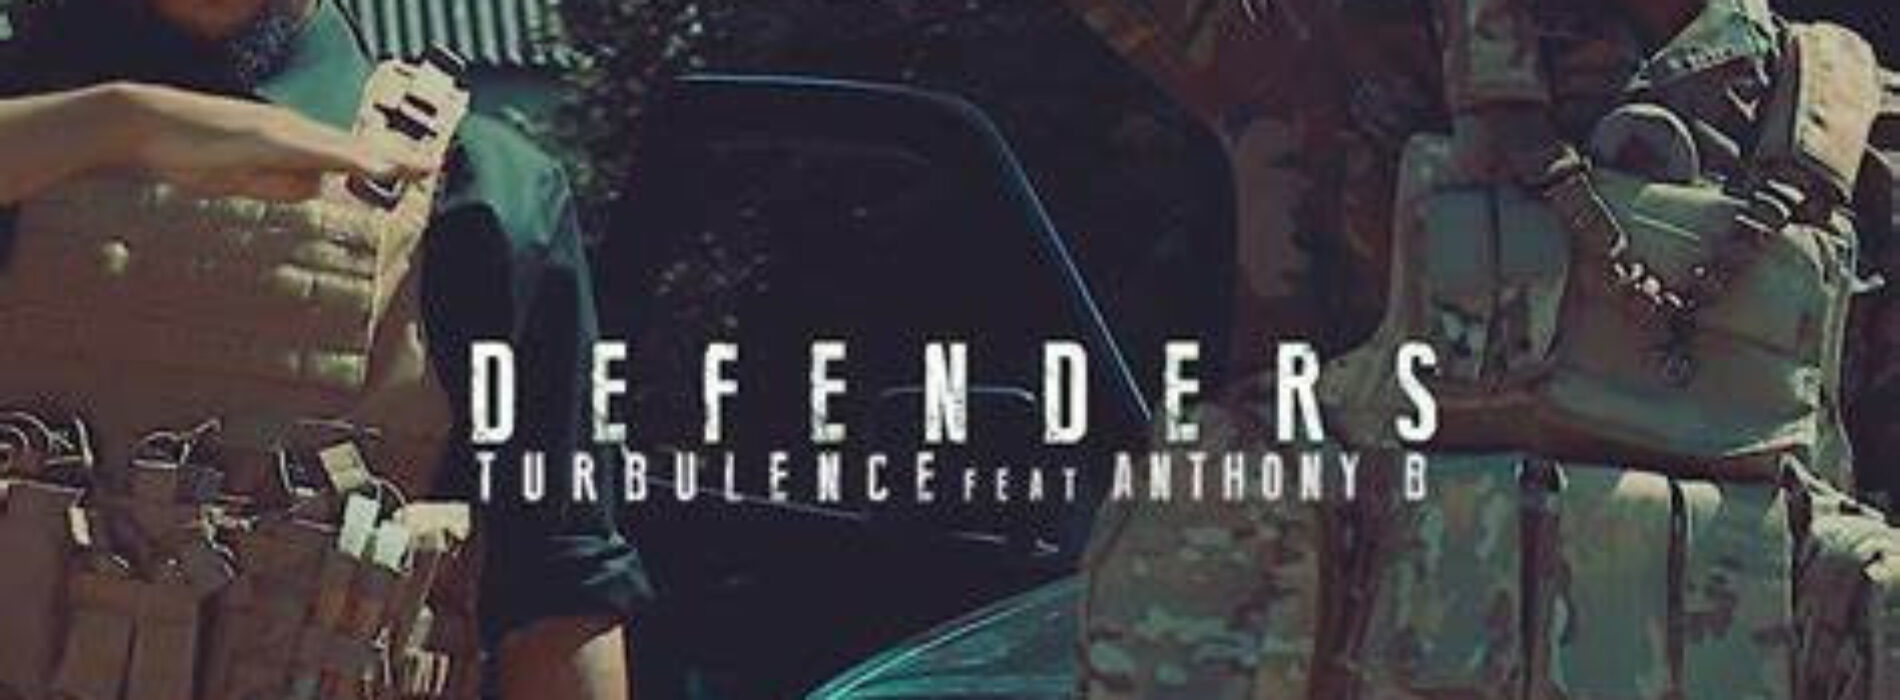 Turbulence – Defenders feat. Anthony B (Official Video) – Janvier 2021